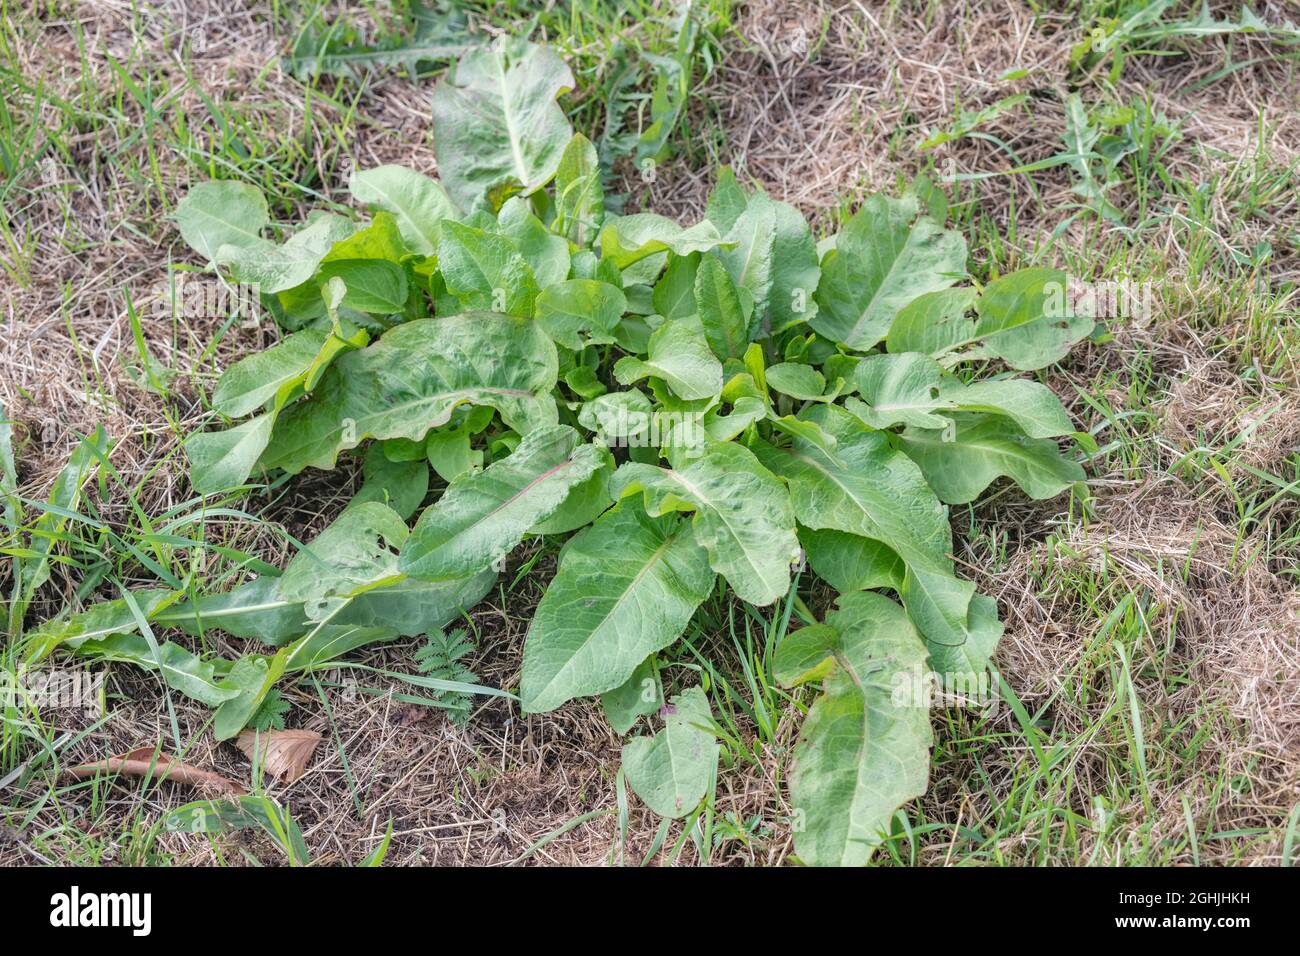 Clump of large leaves of Broad-leaved Dock / Rumex obtusifolius at the side of a cropped field. It's a troublesome & common agricultural weed in UK. Stock Photo